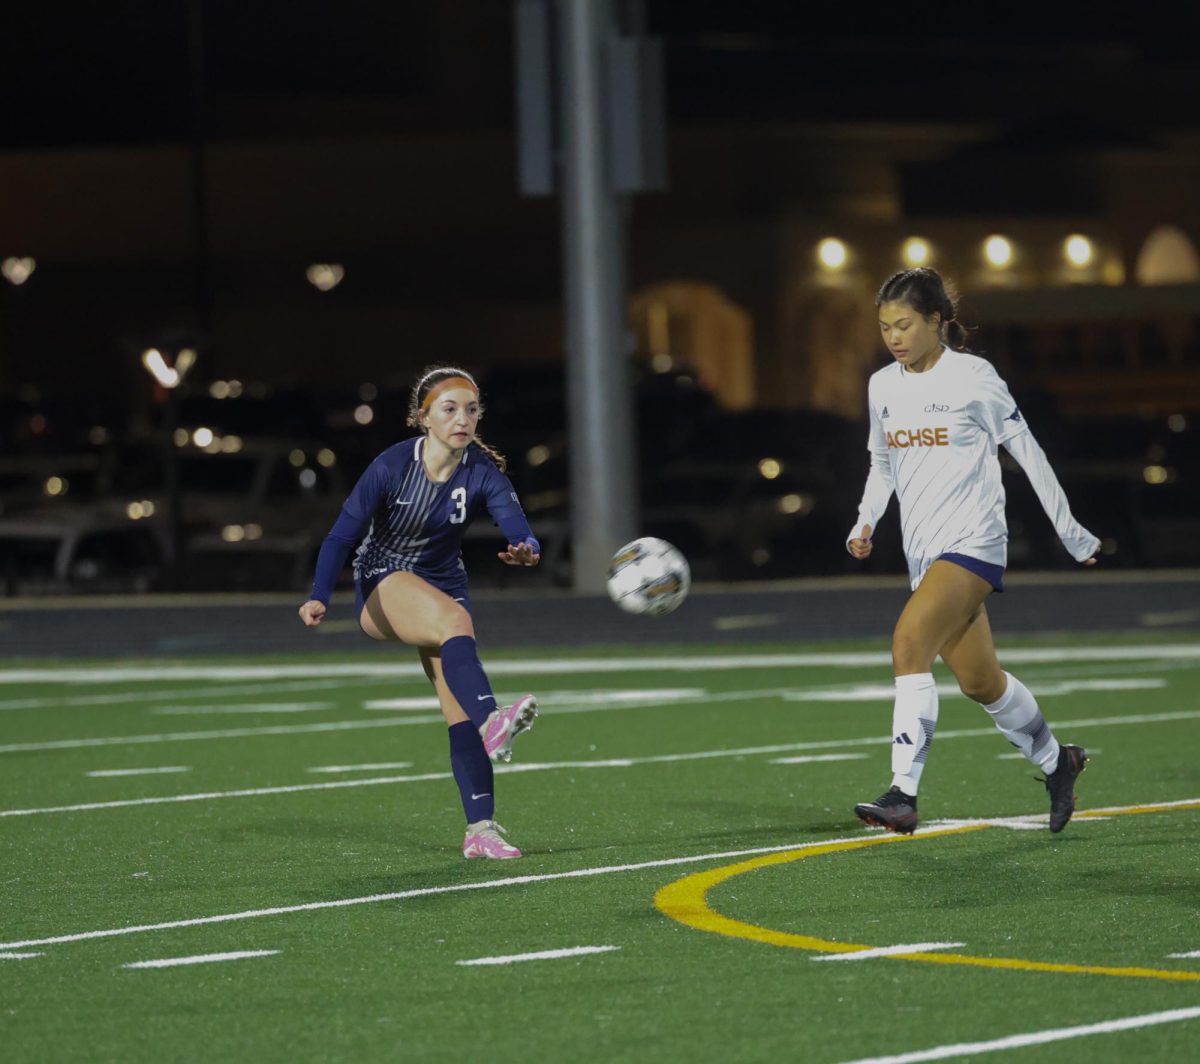 Foot up, No. 3 junior Addy Luna kicks the ball back towards her team and their goal. Luna plays a defense position on the field. The Walnut Grove varsity girls soccer next game is at home on Jan. 23 against Liberty.  